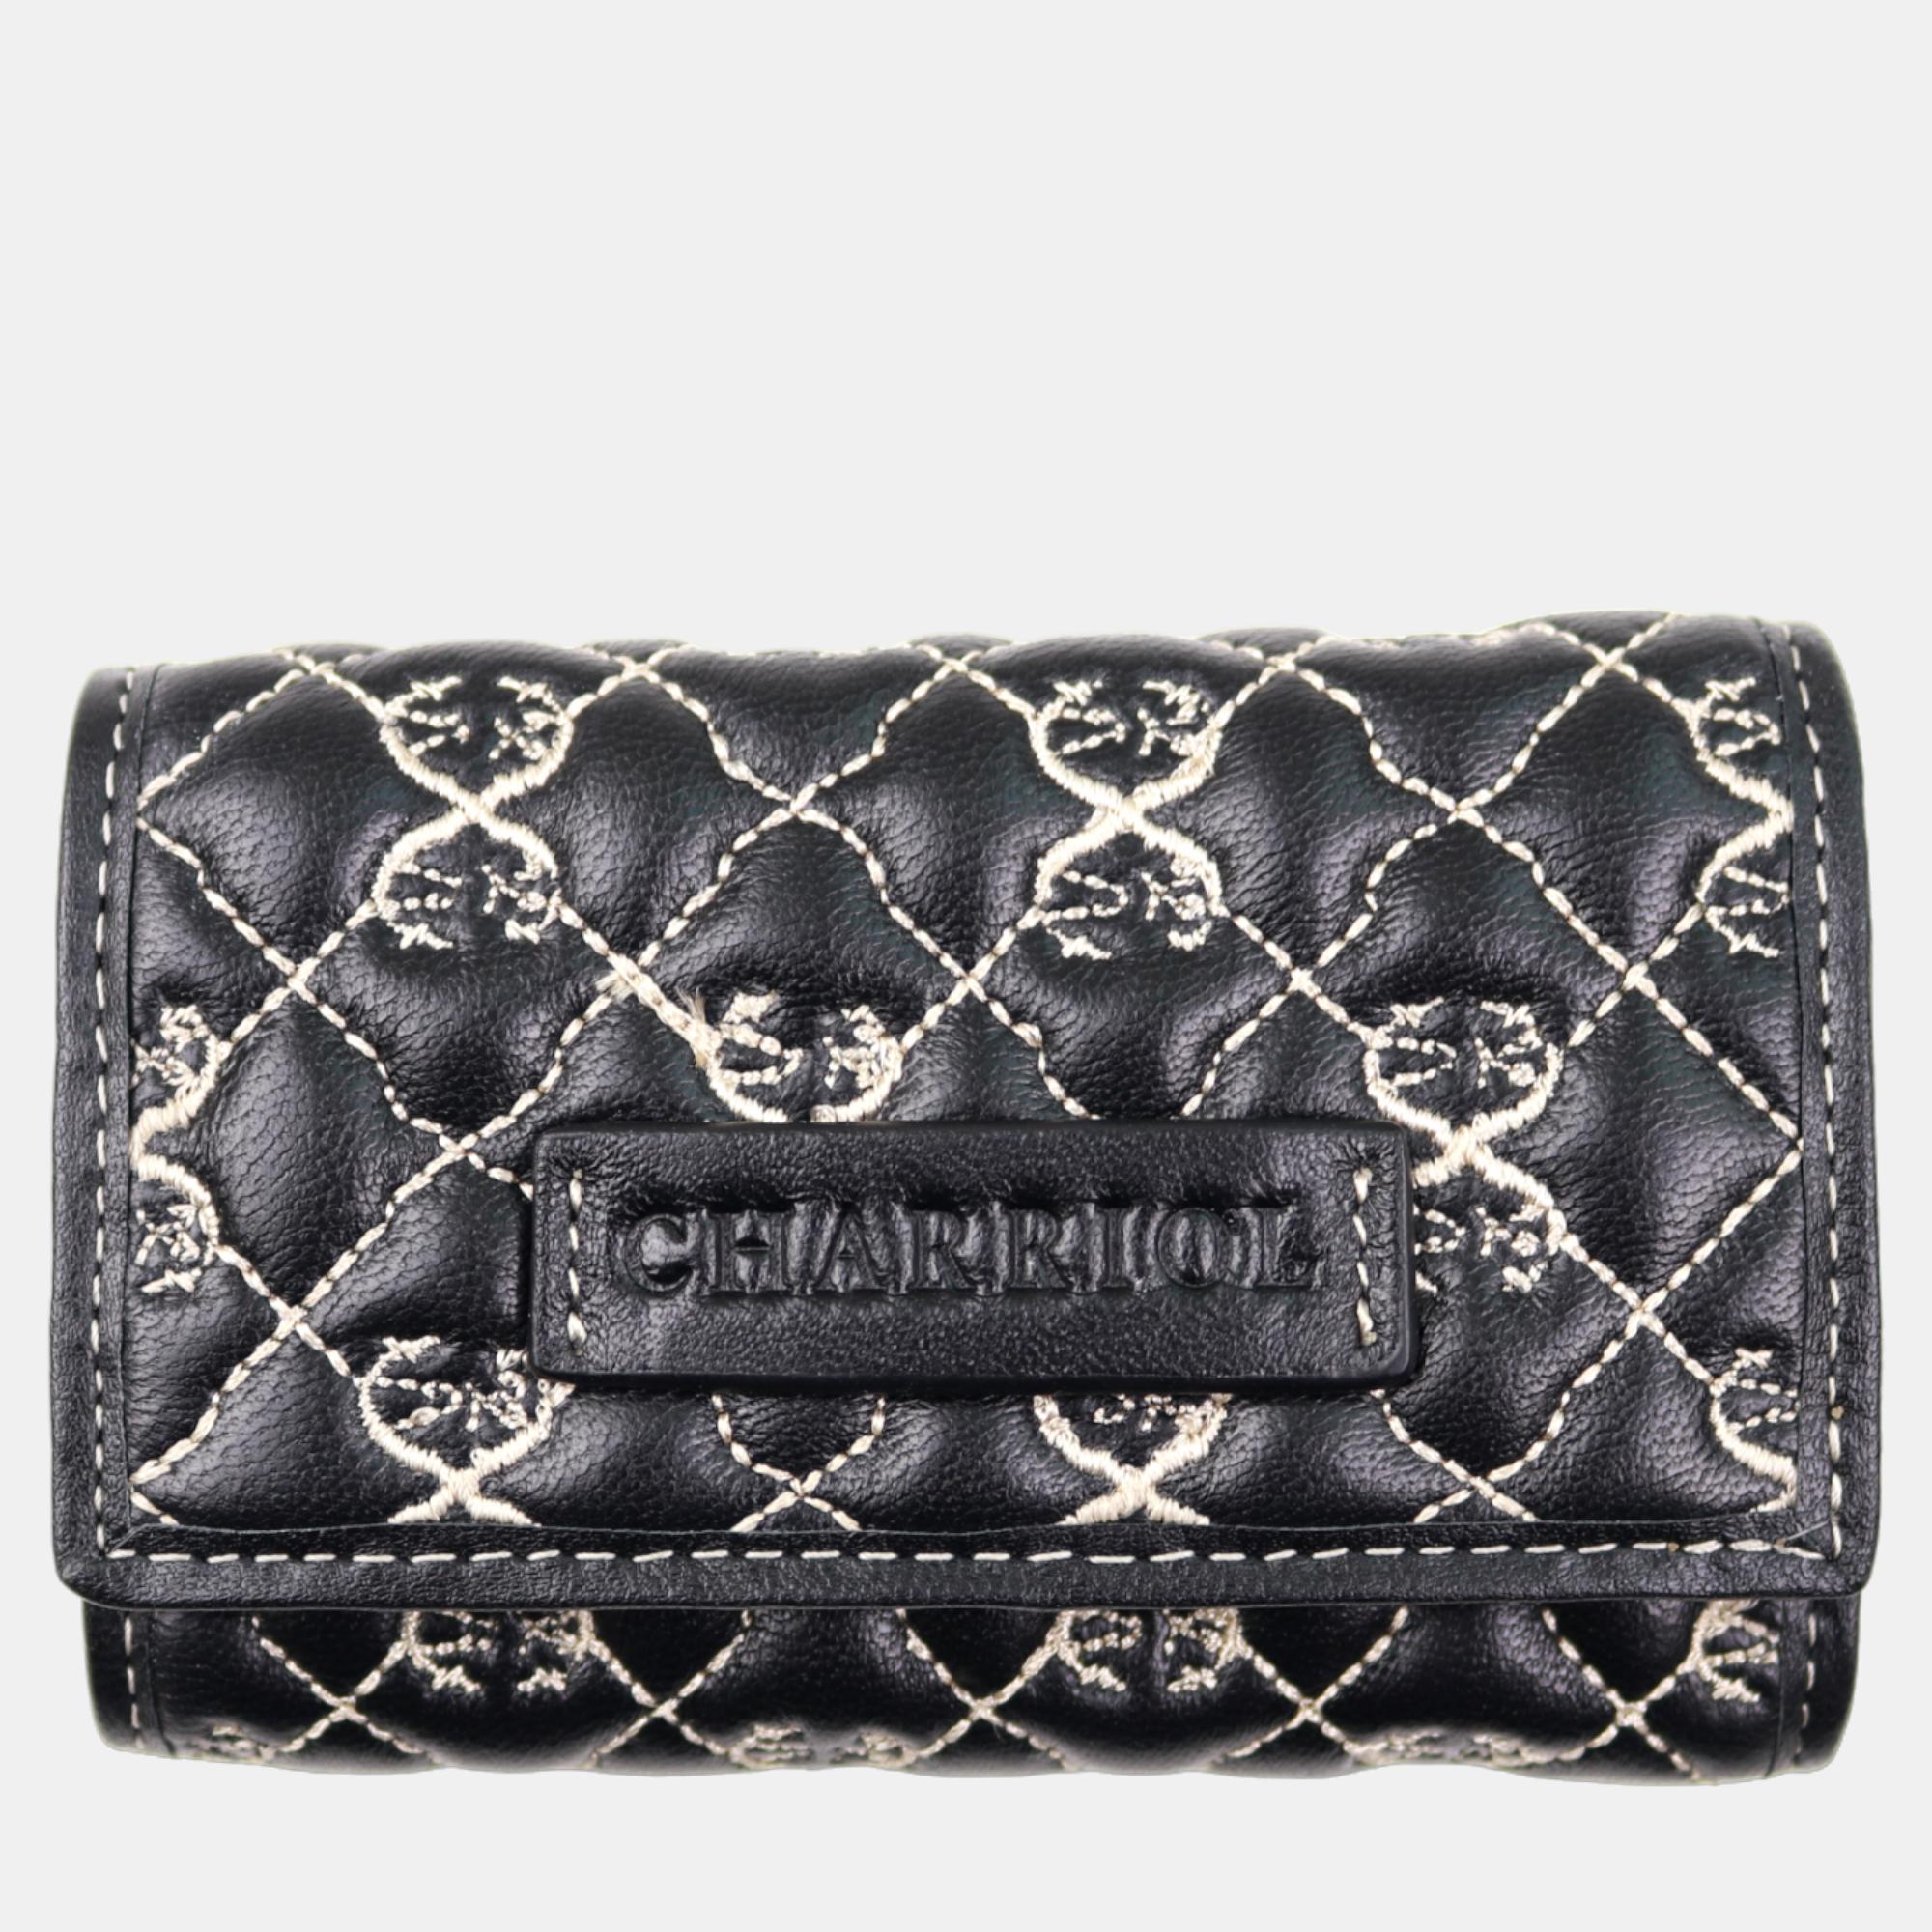 Charriol Black / Beige Leather Quilted Purses